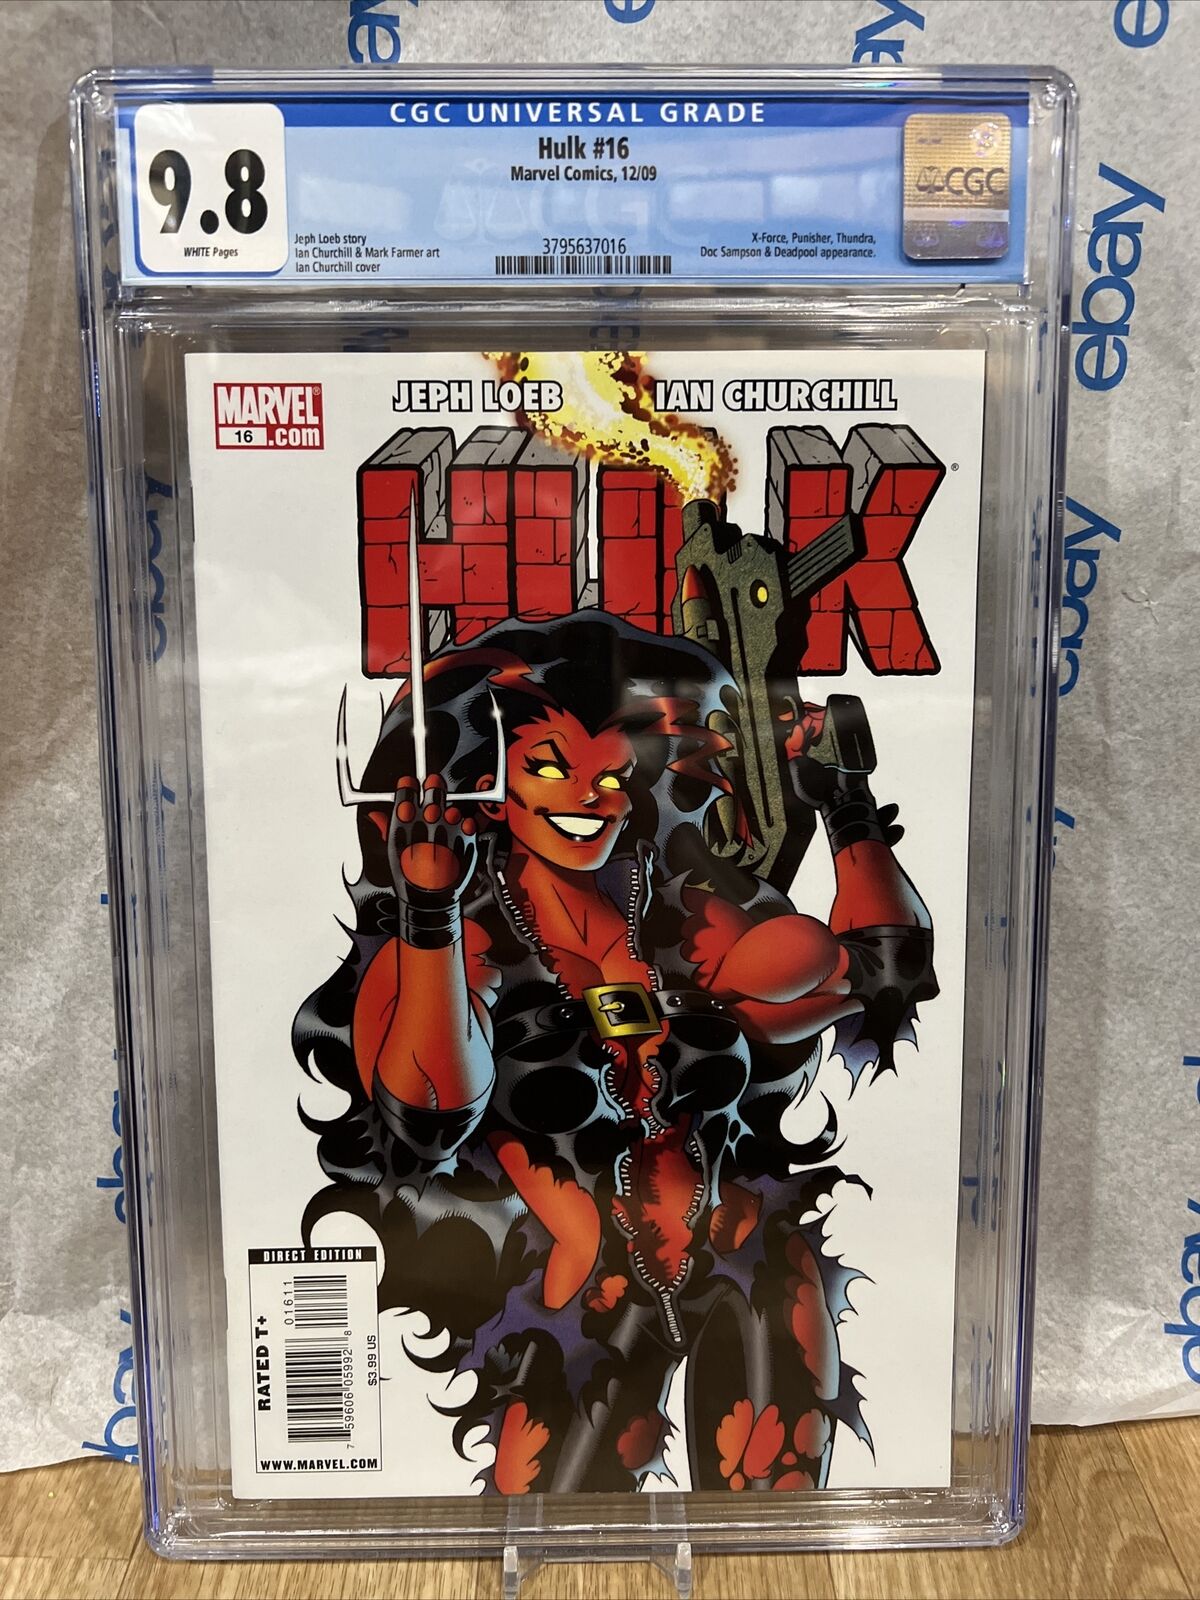 HULK #16 (2009) **CGC 9.8** - 1ST APPEARANCE OF RED SHE-HULK - 9.8 WHITE PAGES